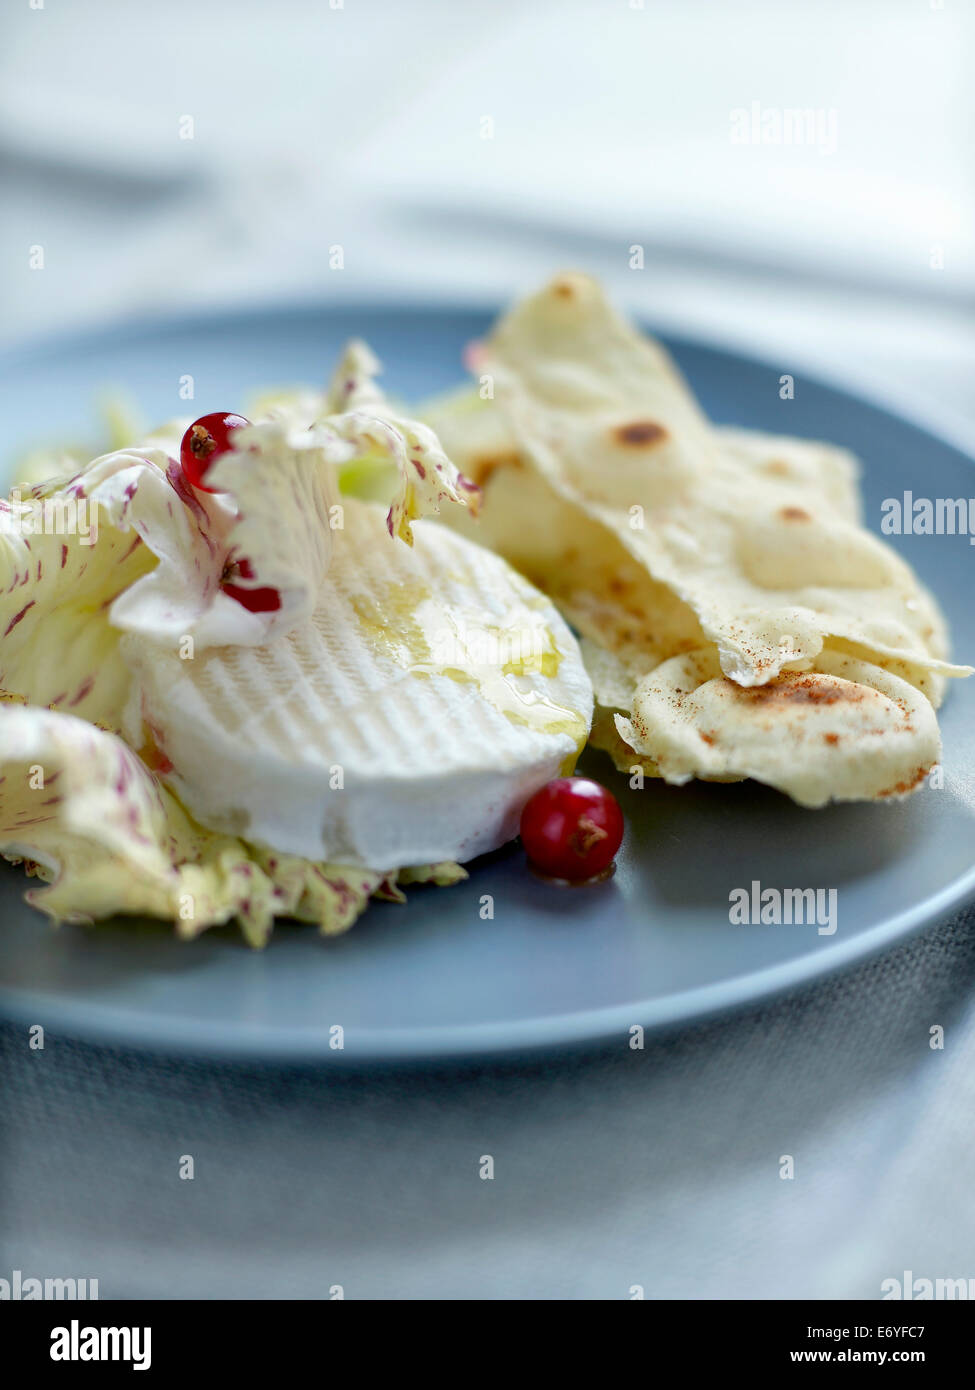 Goat's cheese with redcurrants and spicy crisp bread Stock Photo